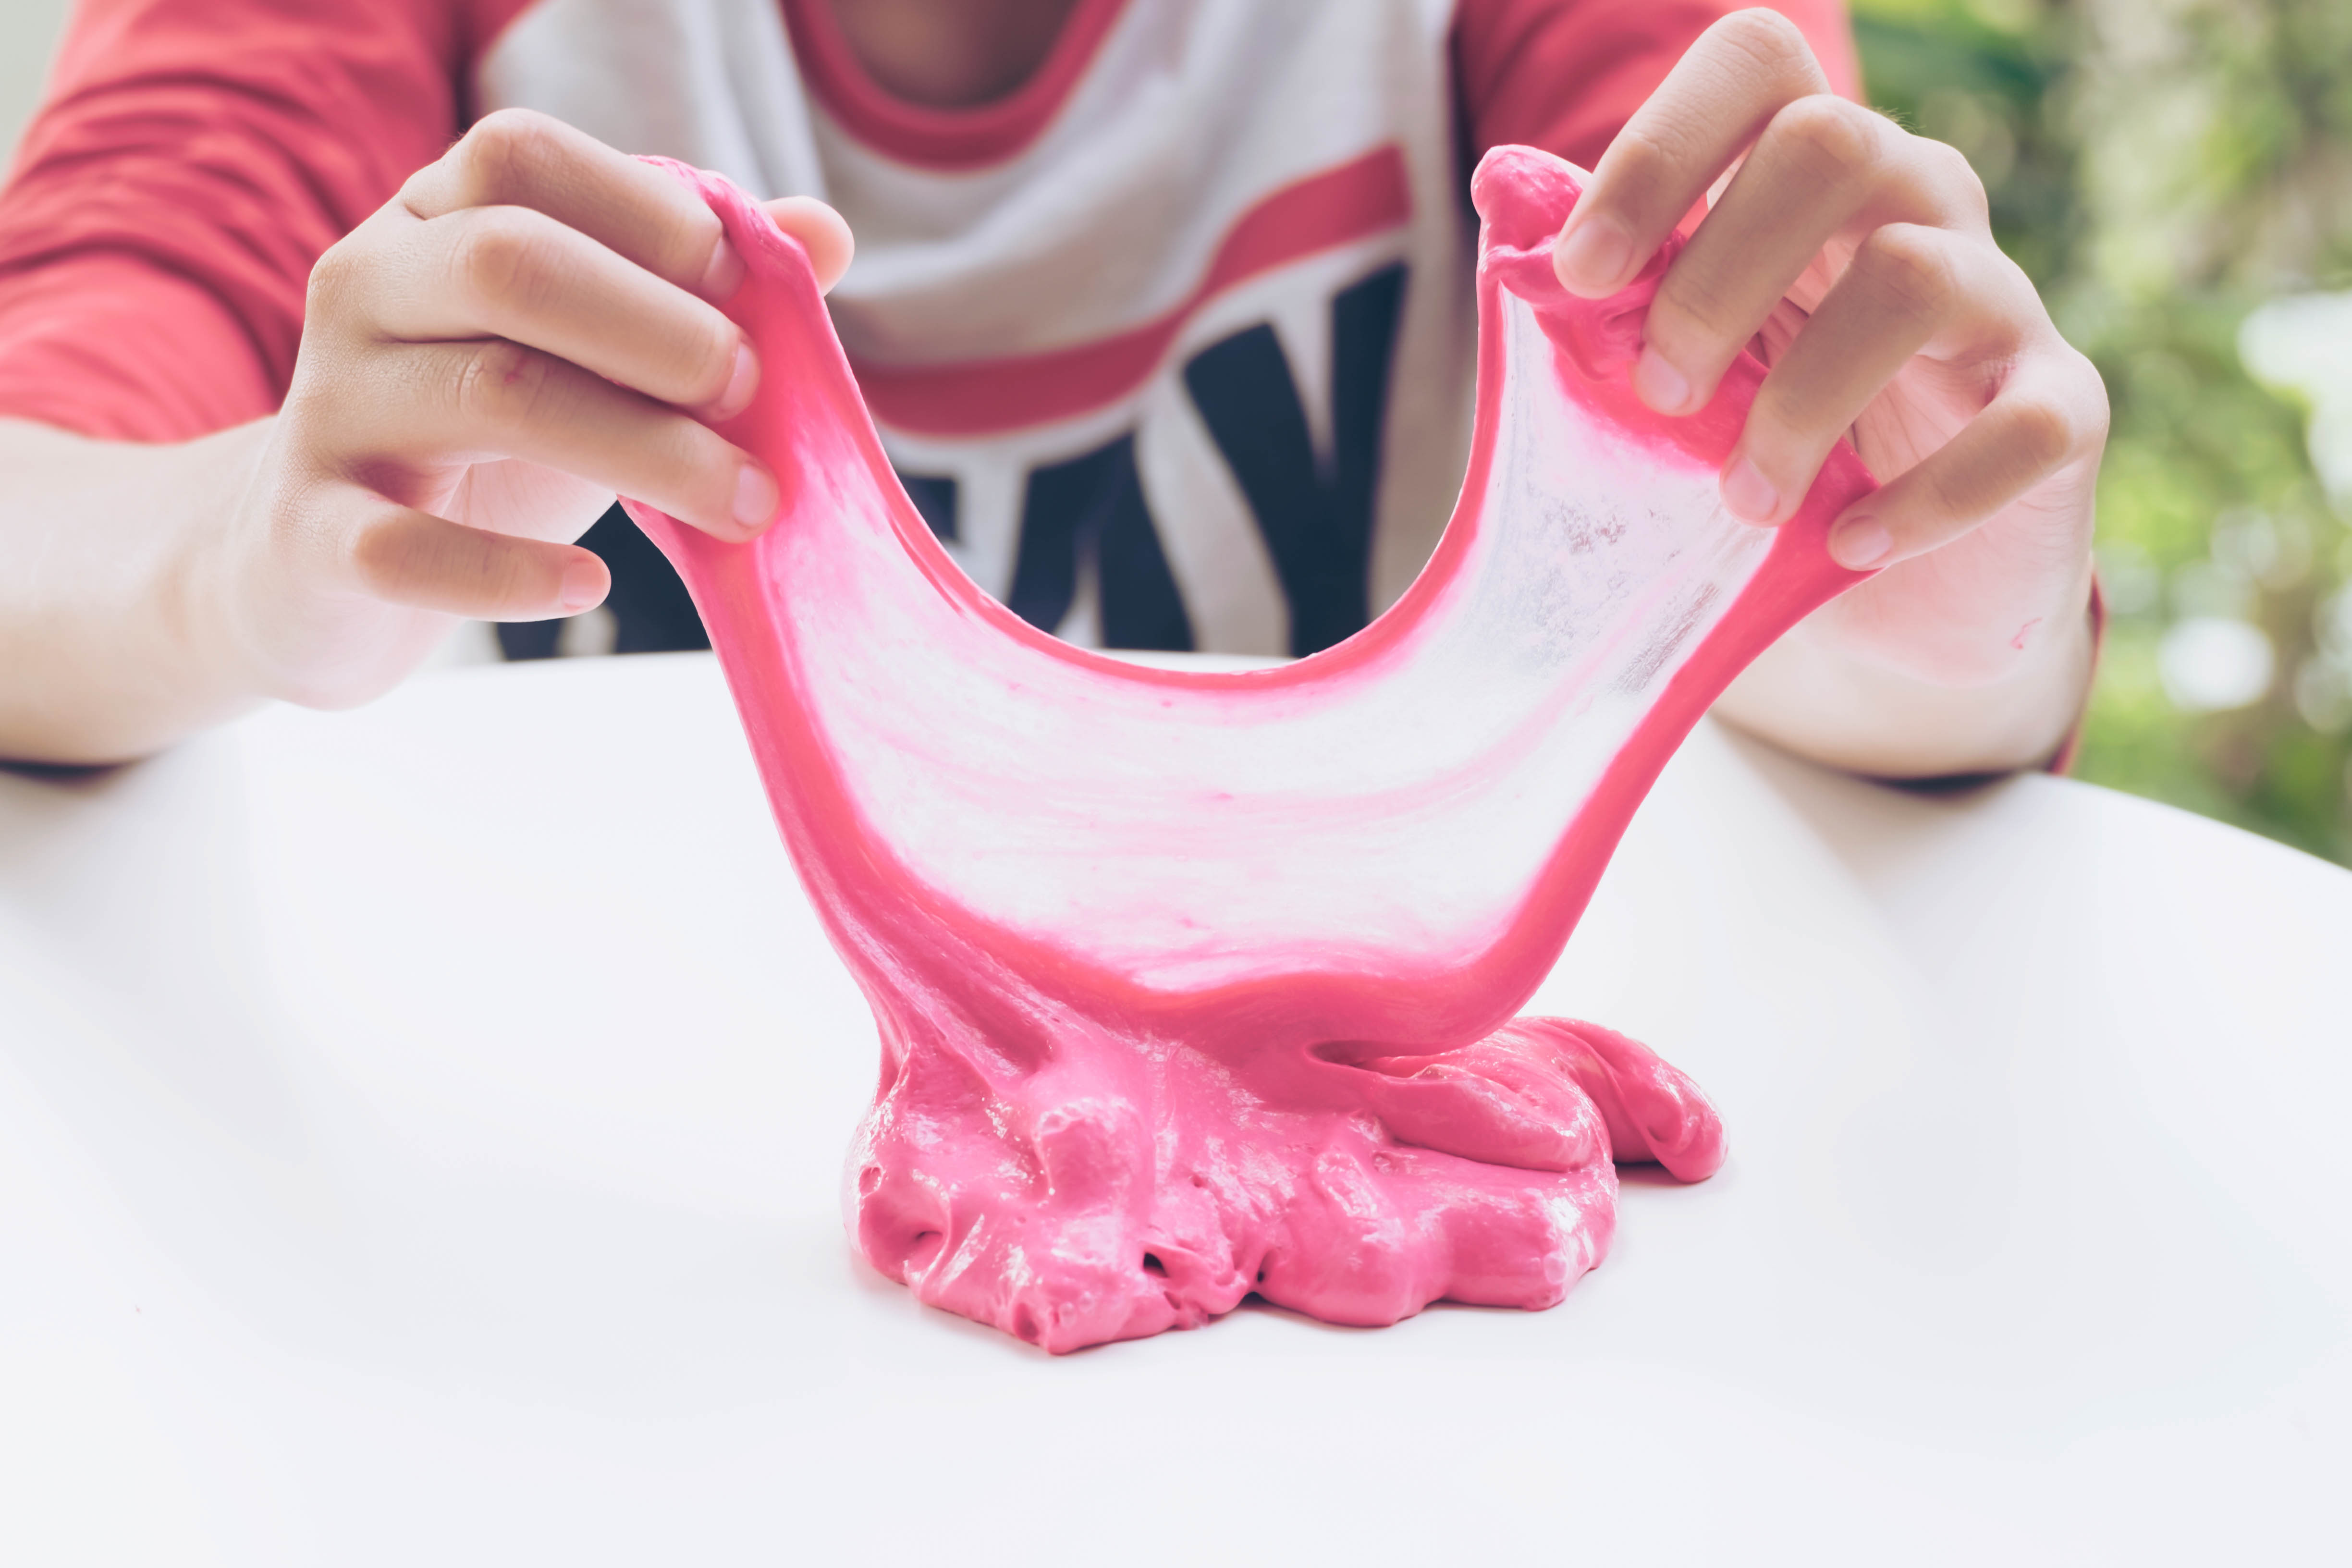 Homemade Slime: Experts Weigh in on Safety, Germs